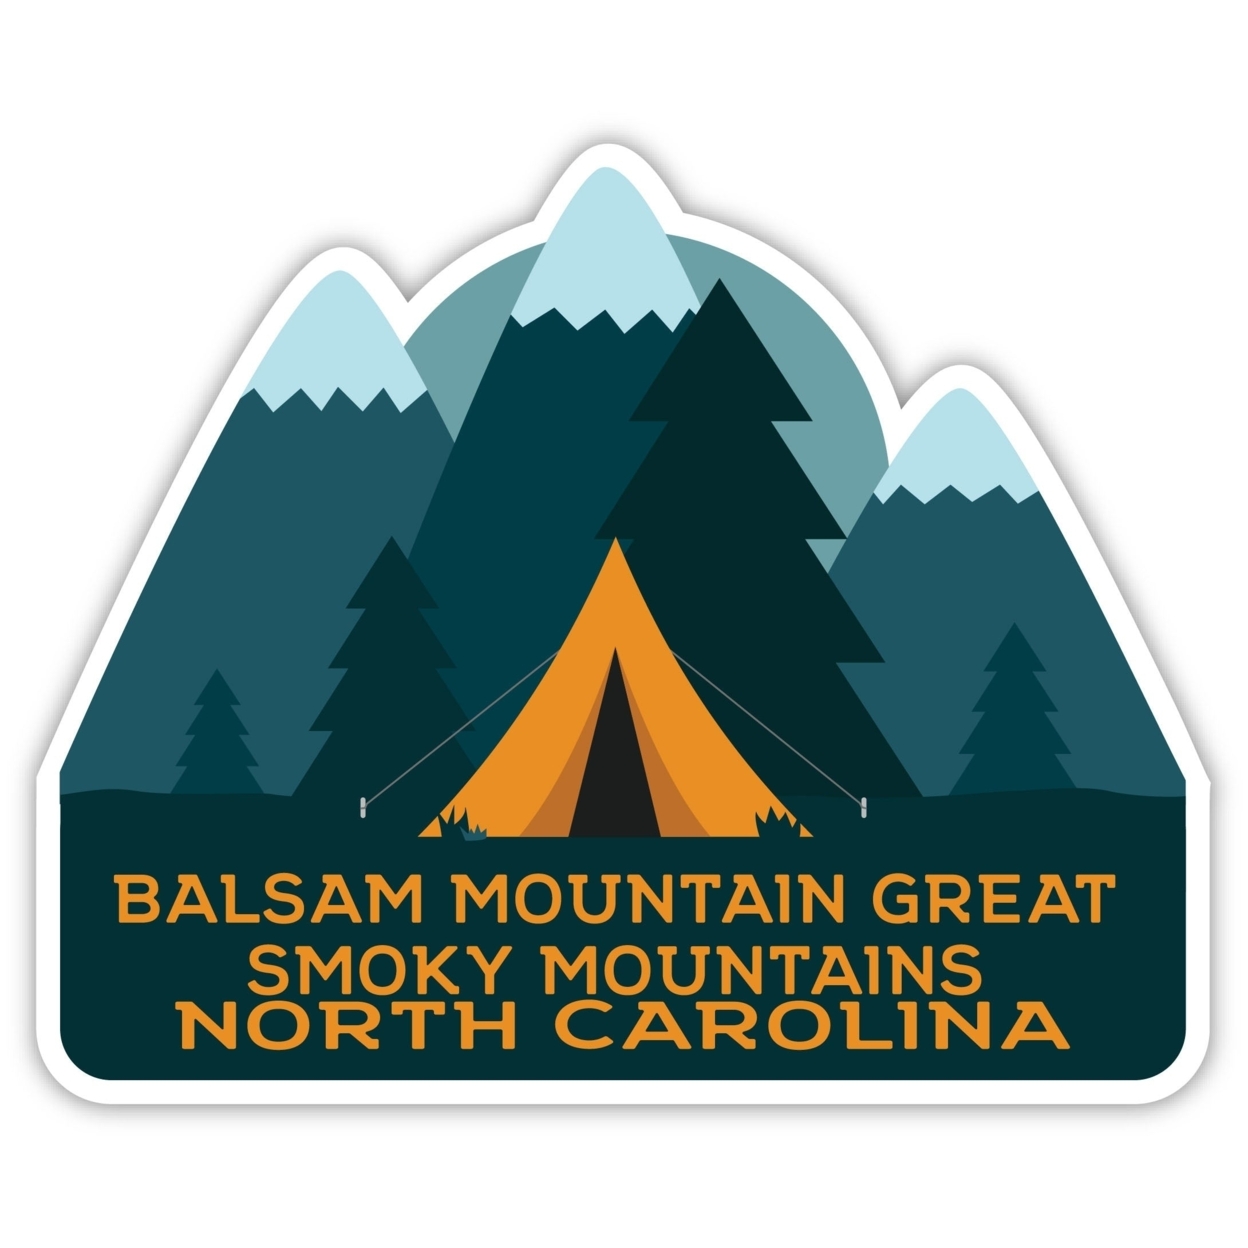 Balsam Mountain Great Smoky Mountains North Carolina Souvenir Decorative Stickers (Choose Theme And Size) - Single Unit, 4-Inch, Tent